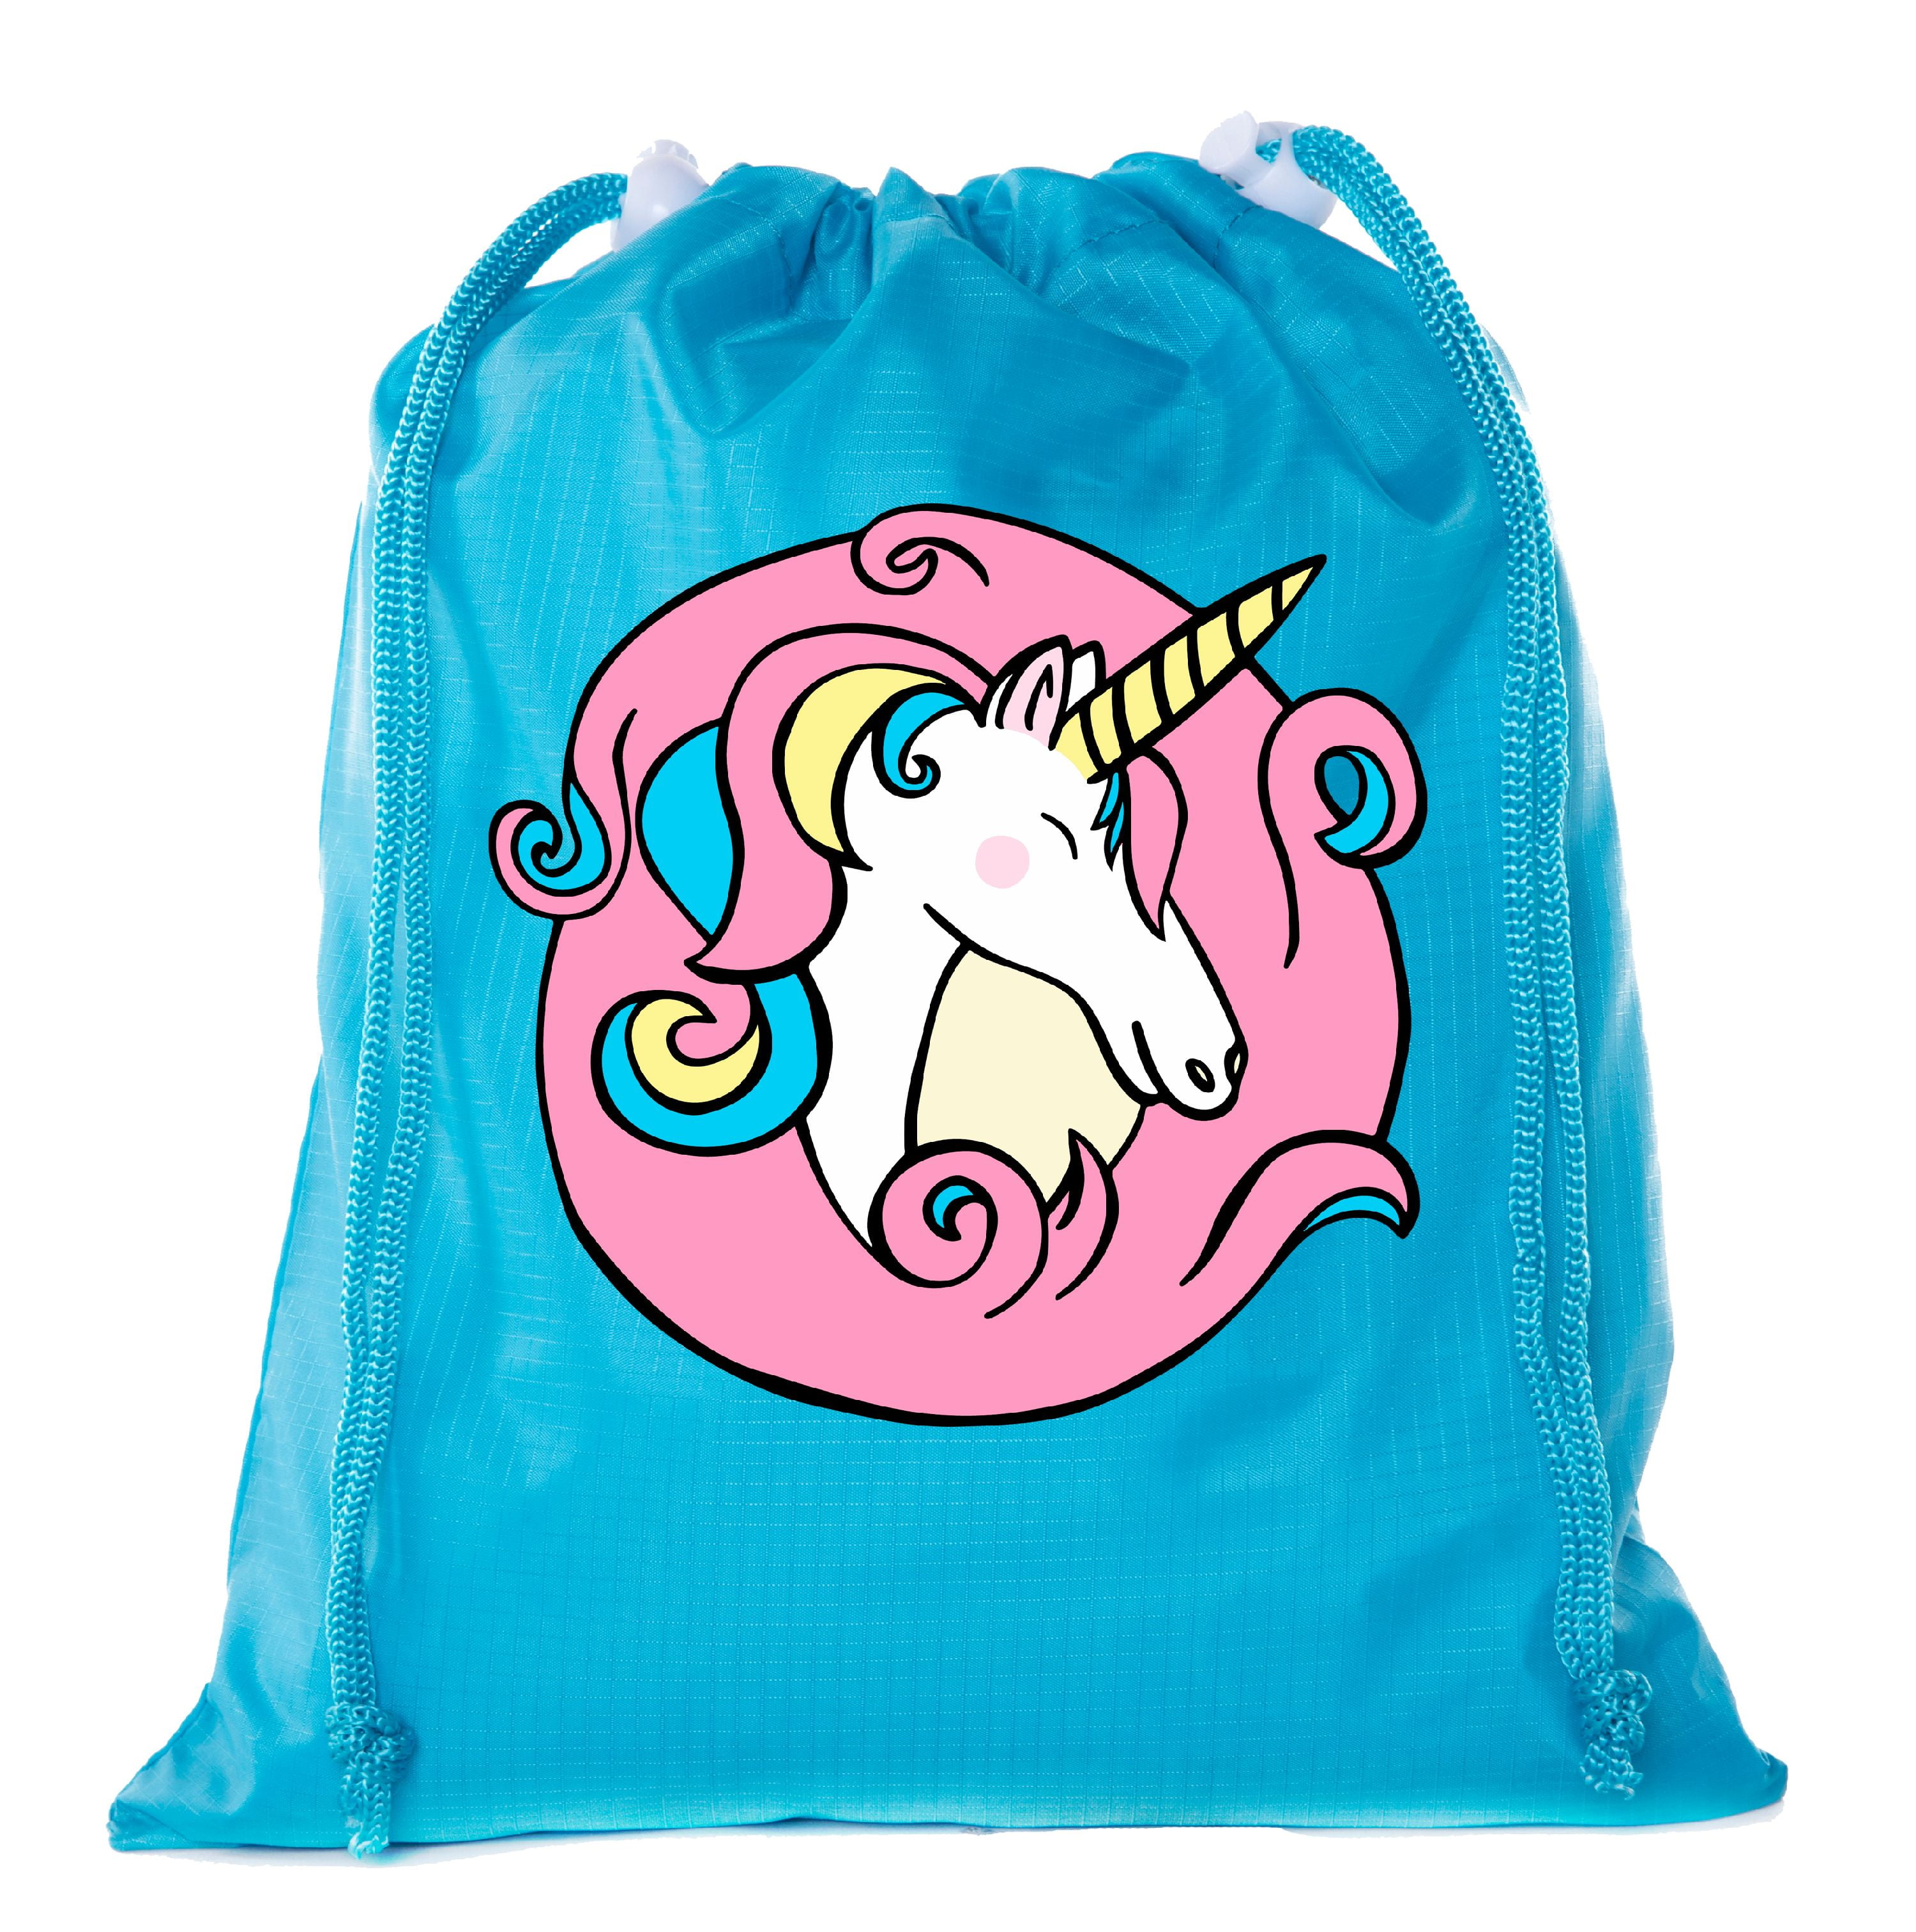 SIQUK 18 Packs Unicorn Drawstring Party Bags Gift Bags Unicorn Drawstring Backpacks Party Supplies Favors Bags for Unicorn Themed Party Pink 